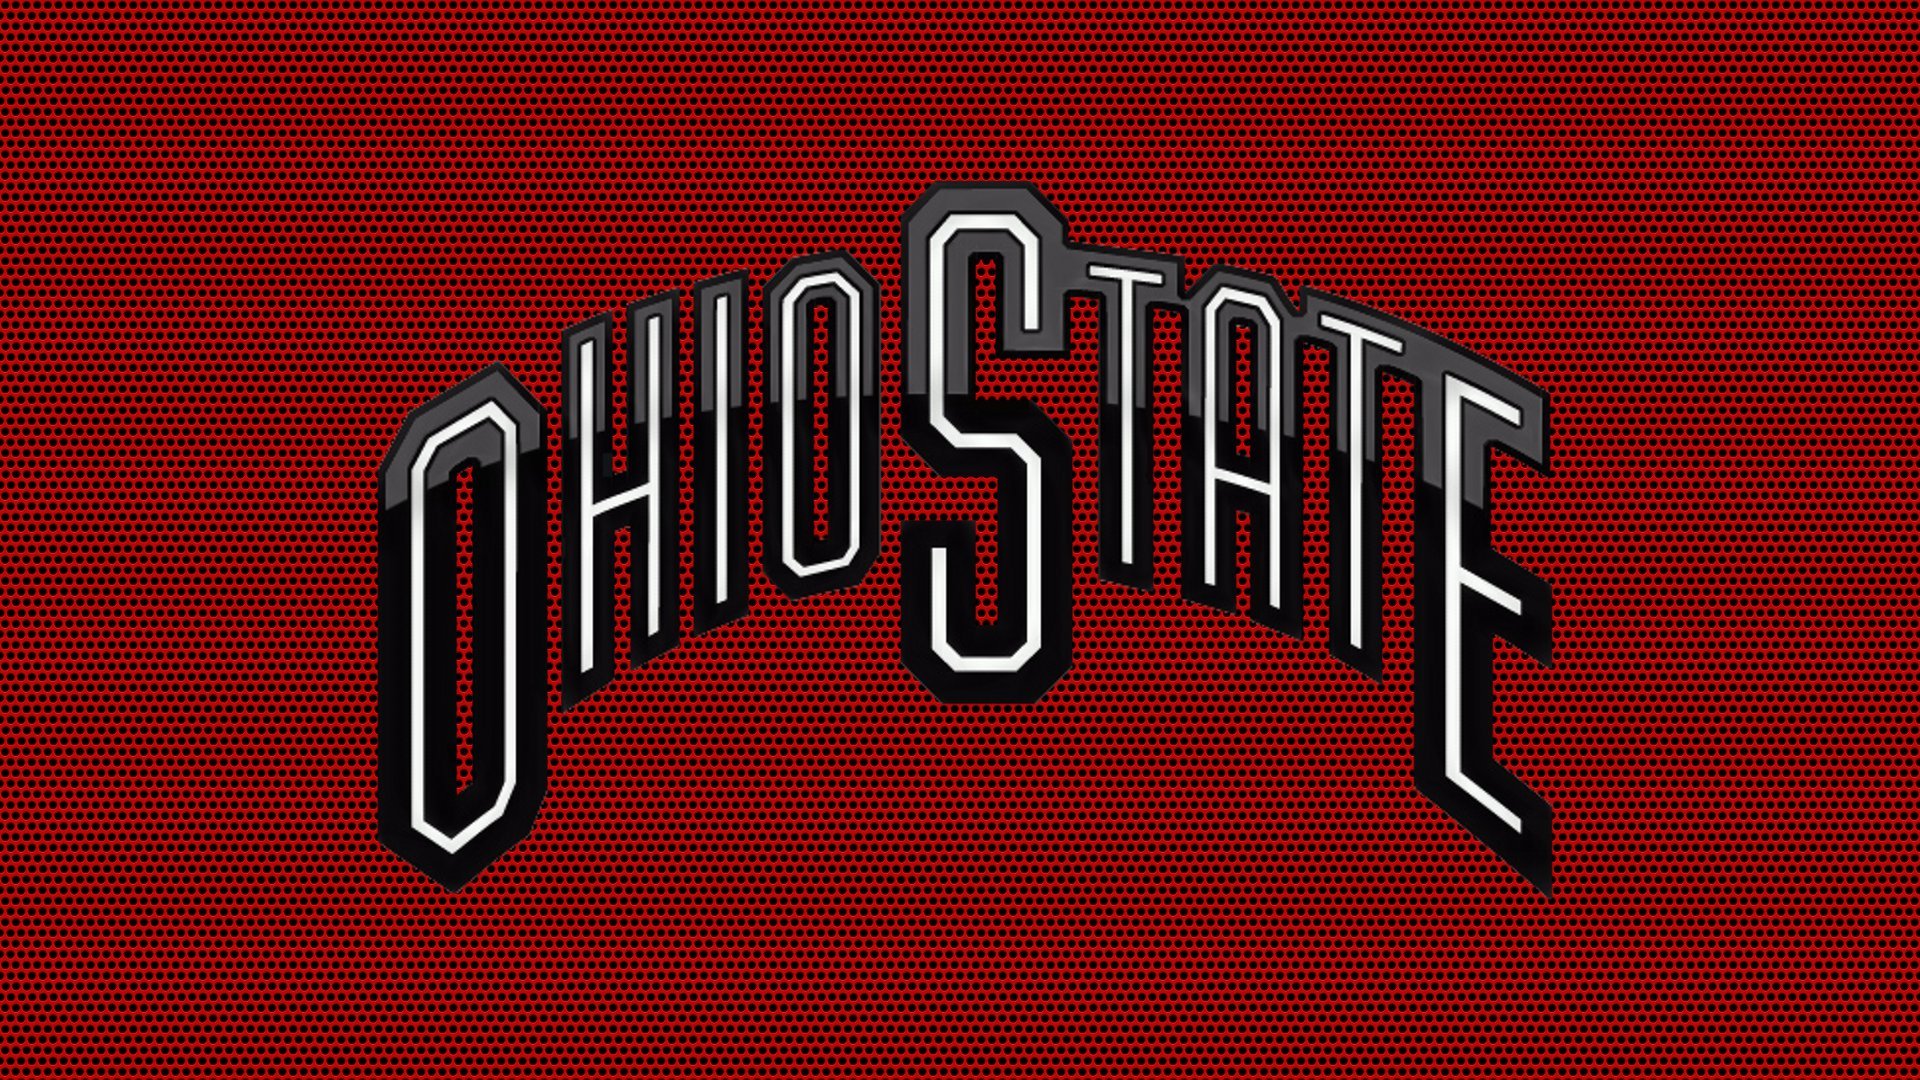 Ohio State Buckeyes Football Backgrounds High Quality | Wallpapers ...